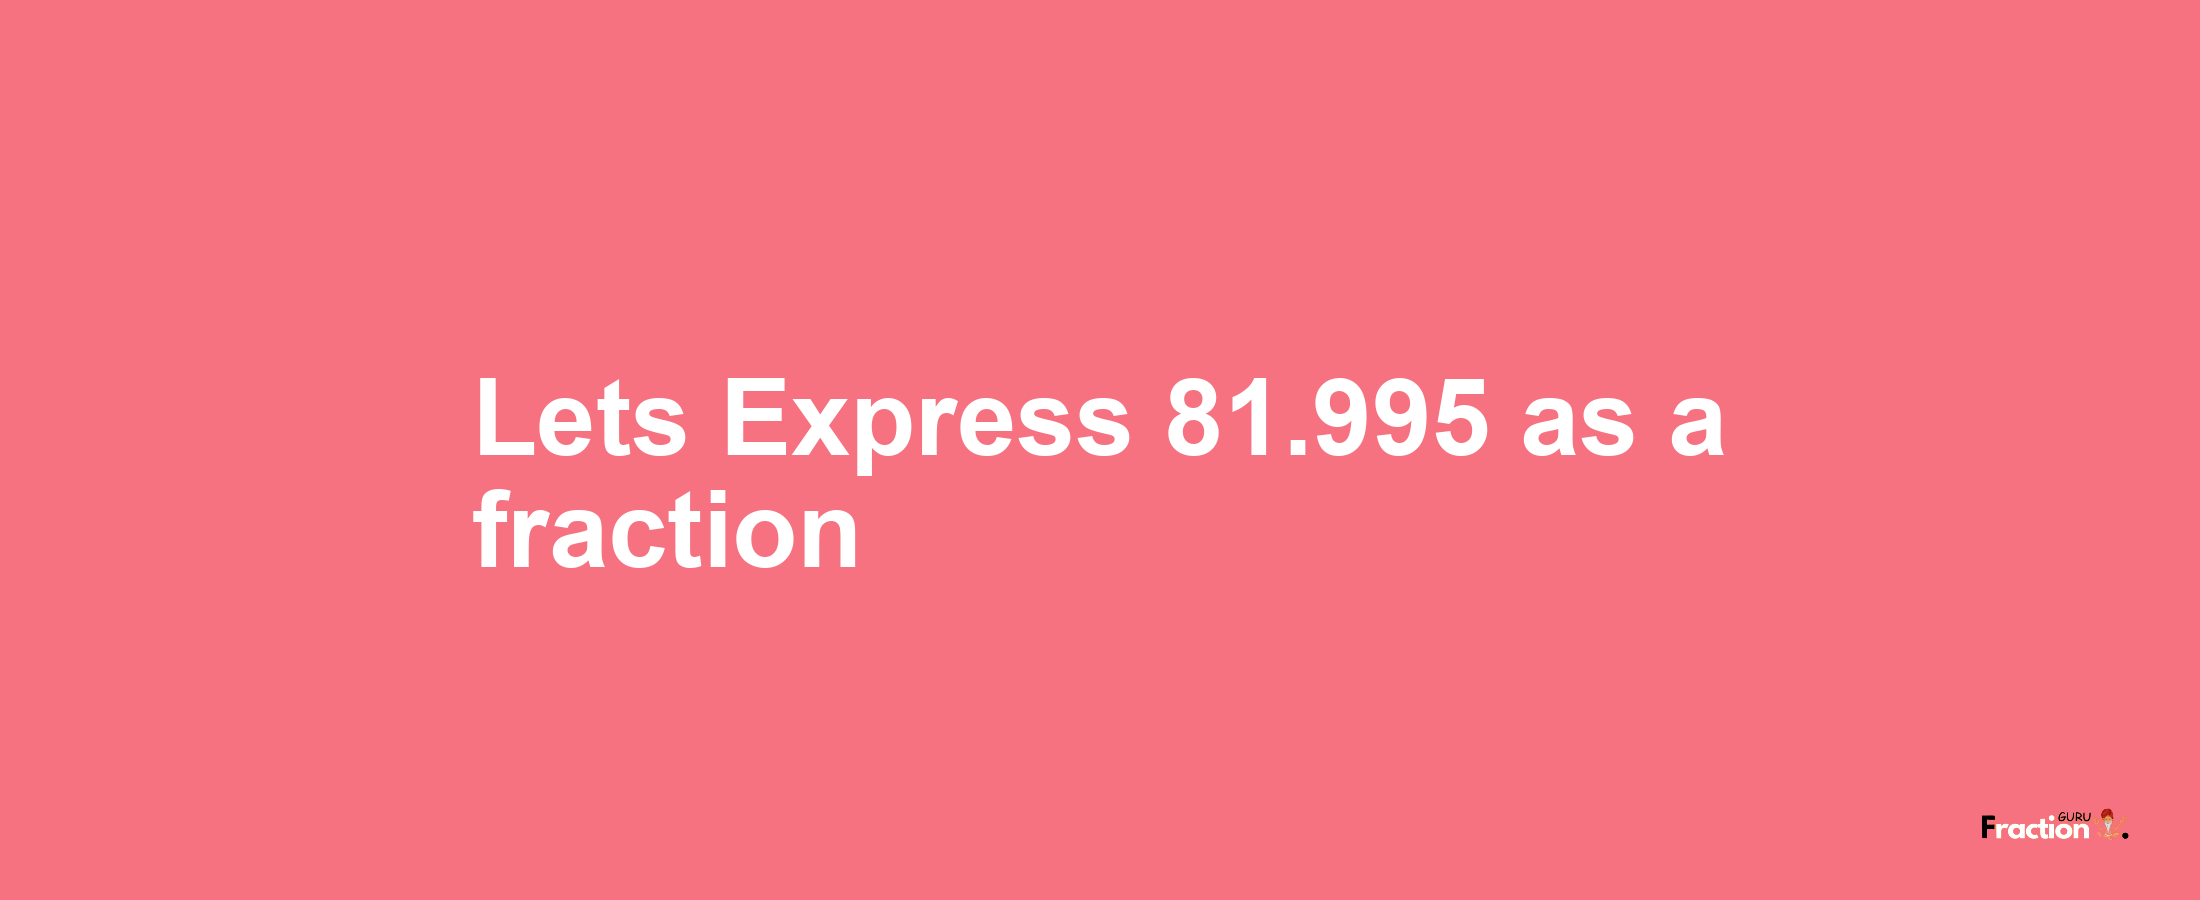 Lets Express 81.995 as afraction